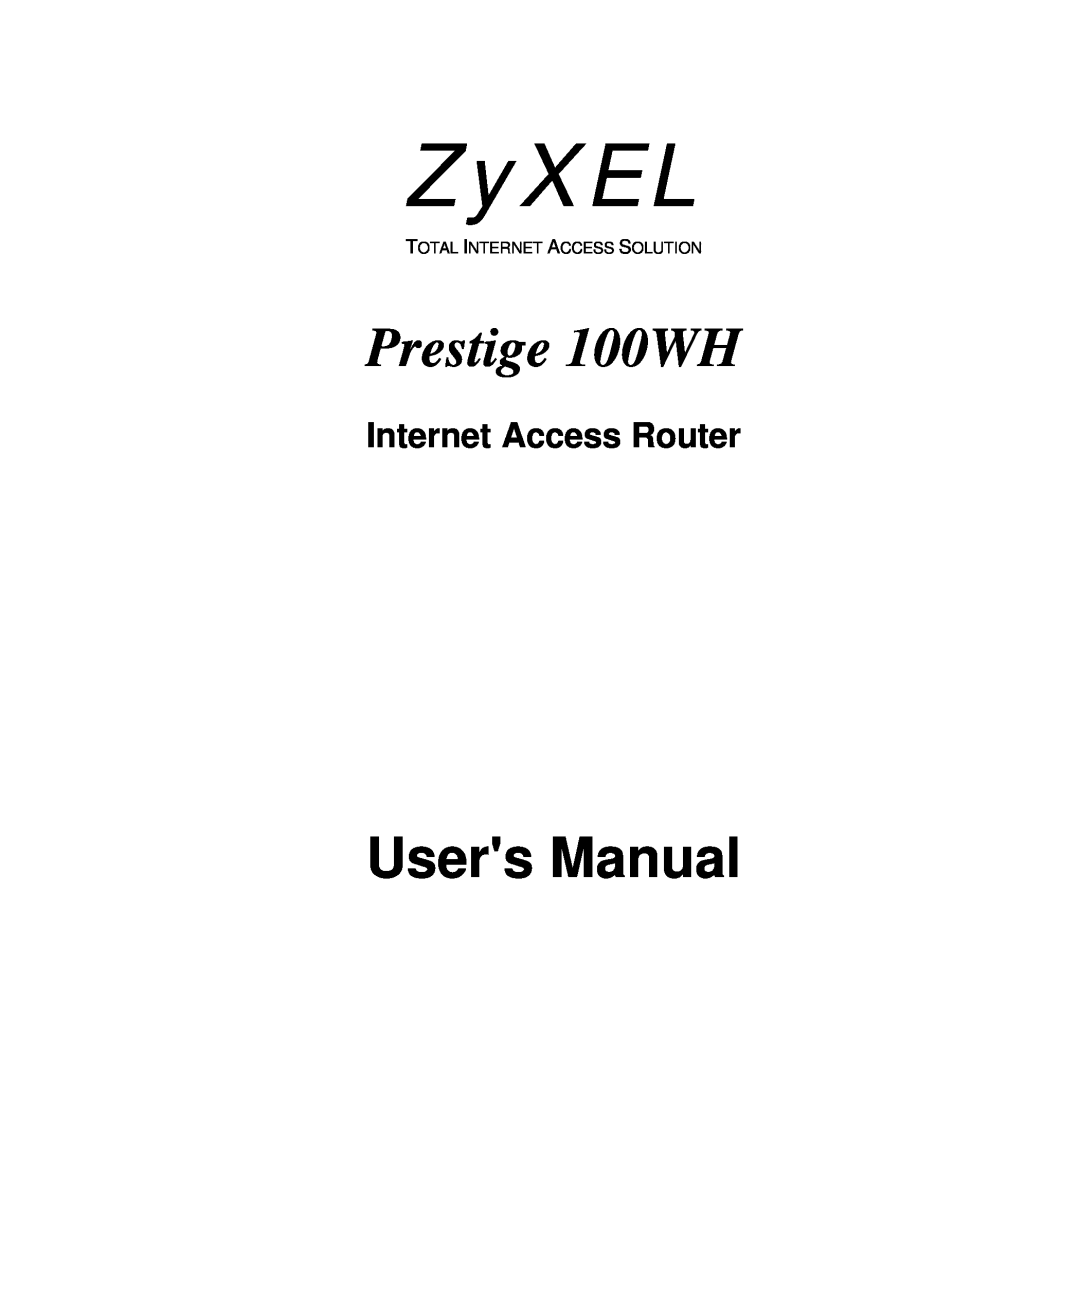 ZyXEL Communications user manual Internet Access Router, ZyXEL, Prestige 100WH, Users Manual 